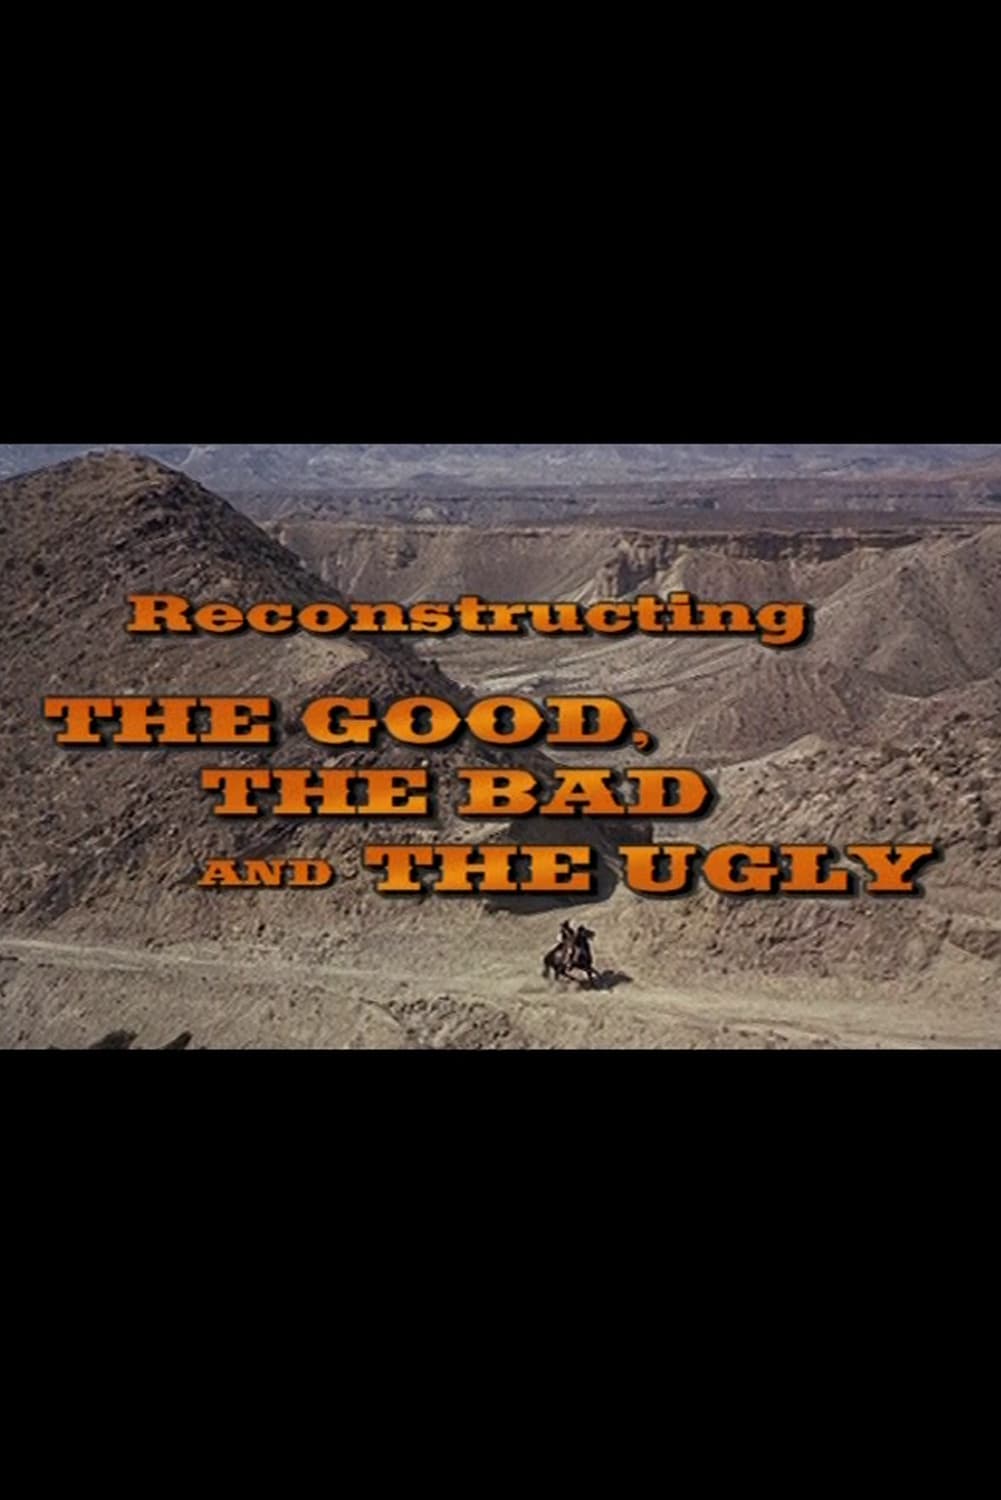 Reconstructing 'The Good, The Bad And The Ugly'